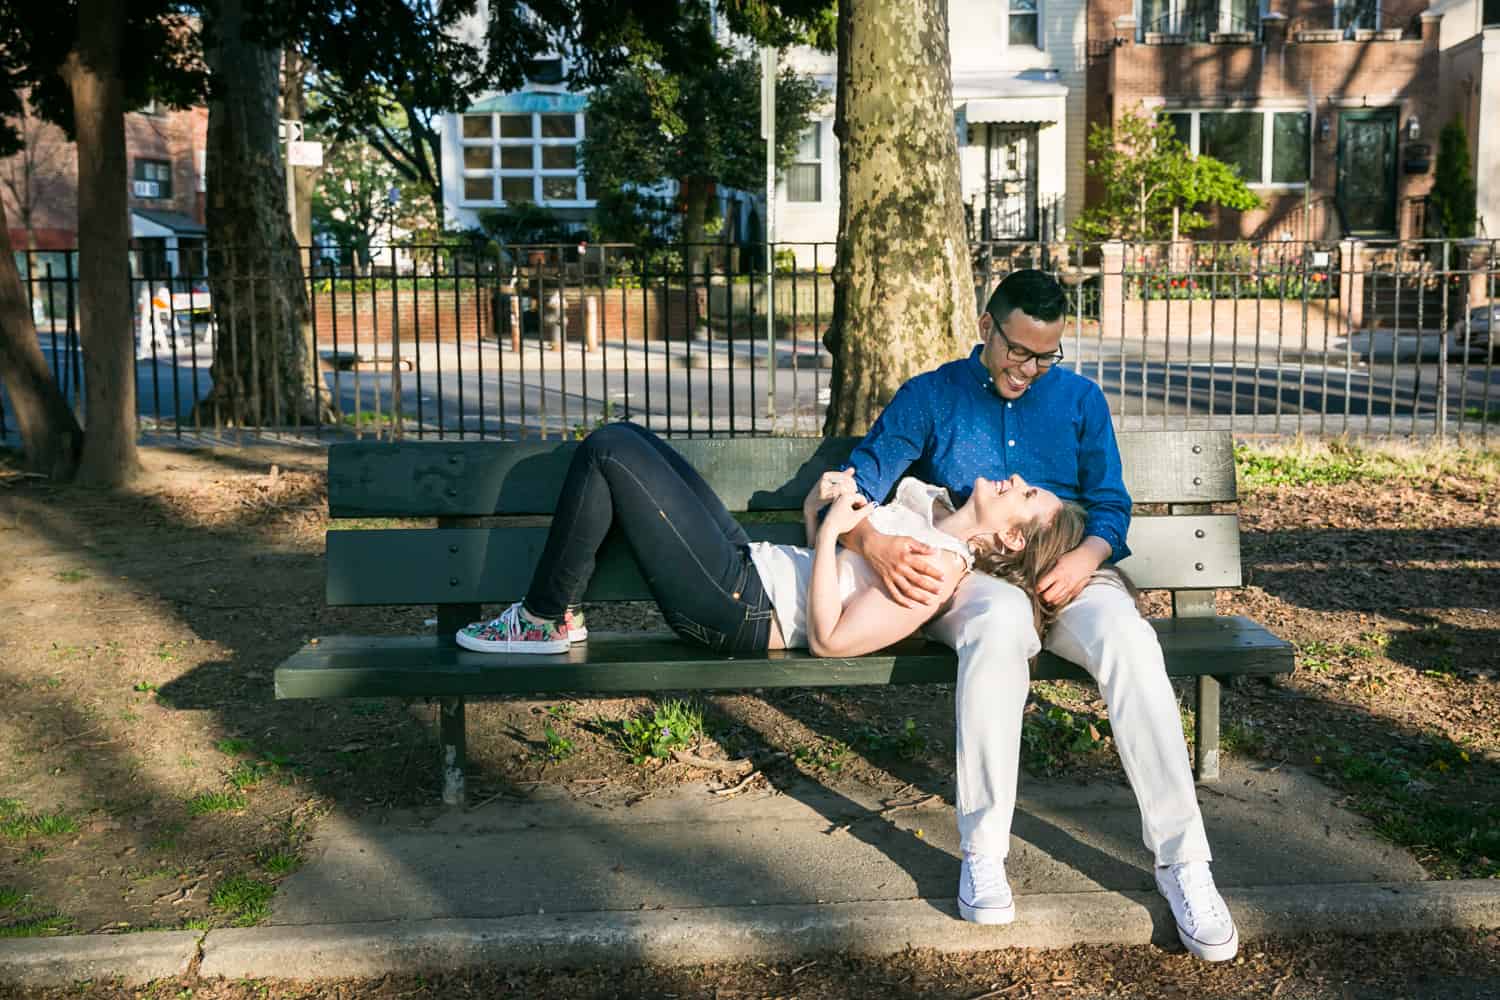 Woman lying in man's lap on bench during an Astoria Park engagement shoot